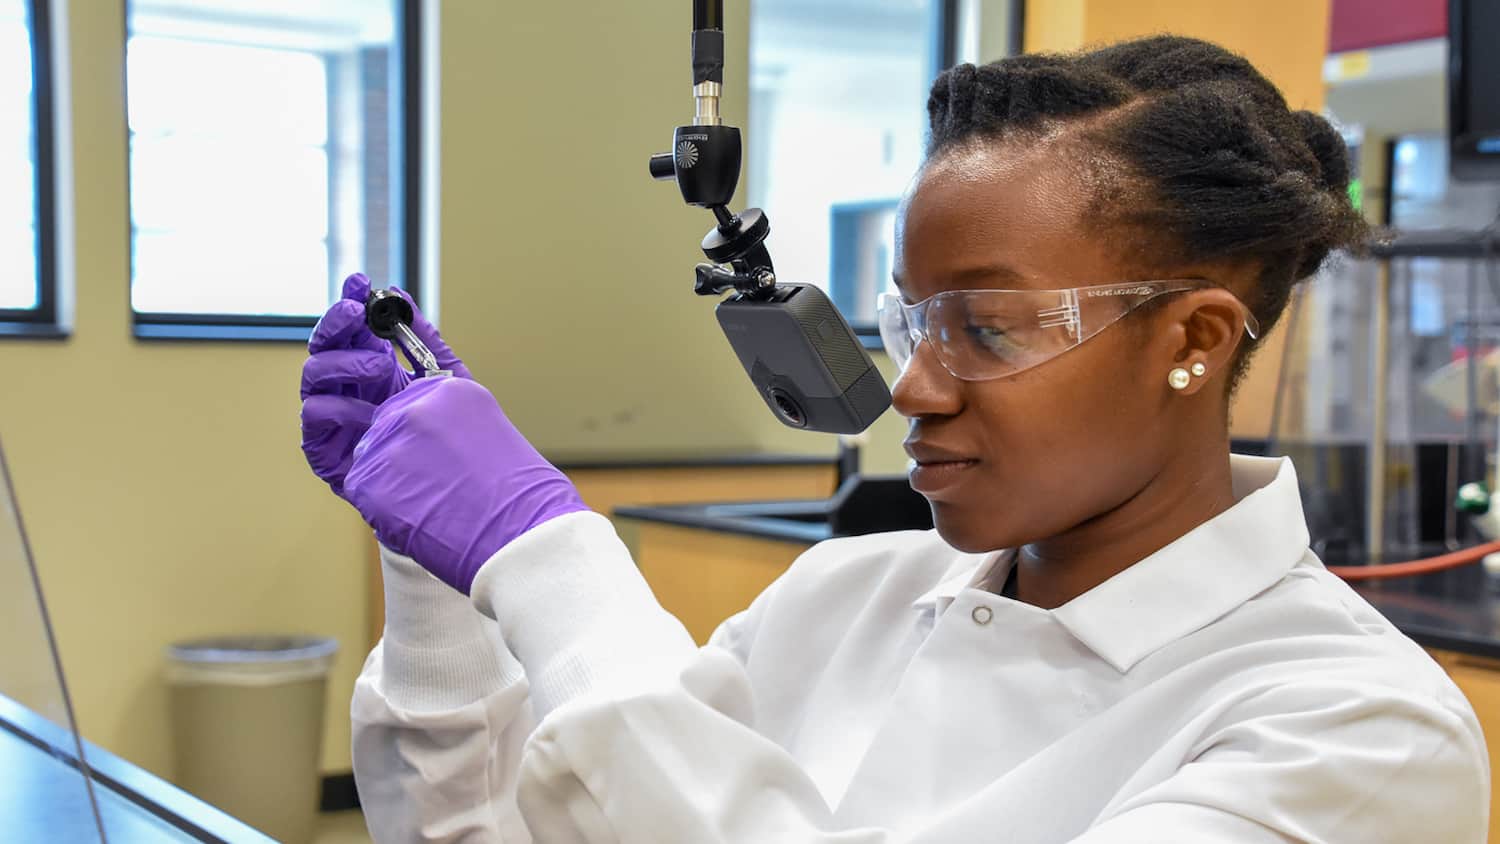 Teaching Assistant Lyniesha Wright during a test shoot of the organic chemistry virtual reality labs. The placement of the GoPro Fusion 360° camera gives the experience a first-person point of view.